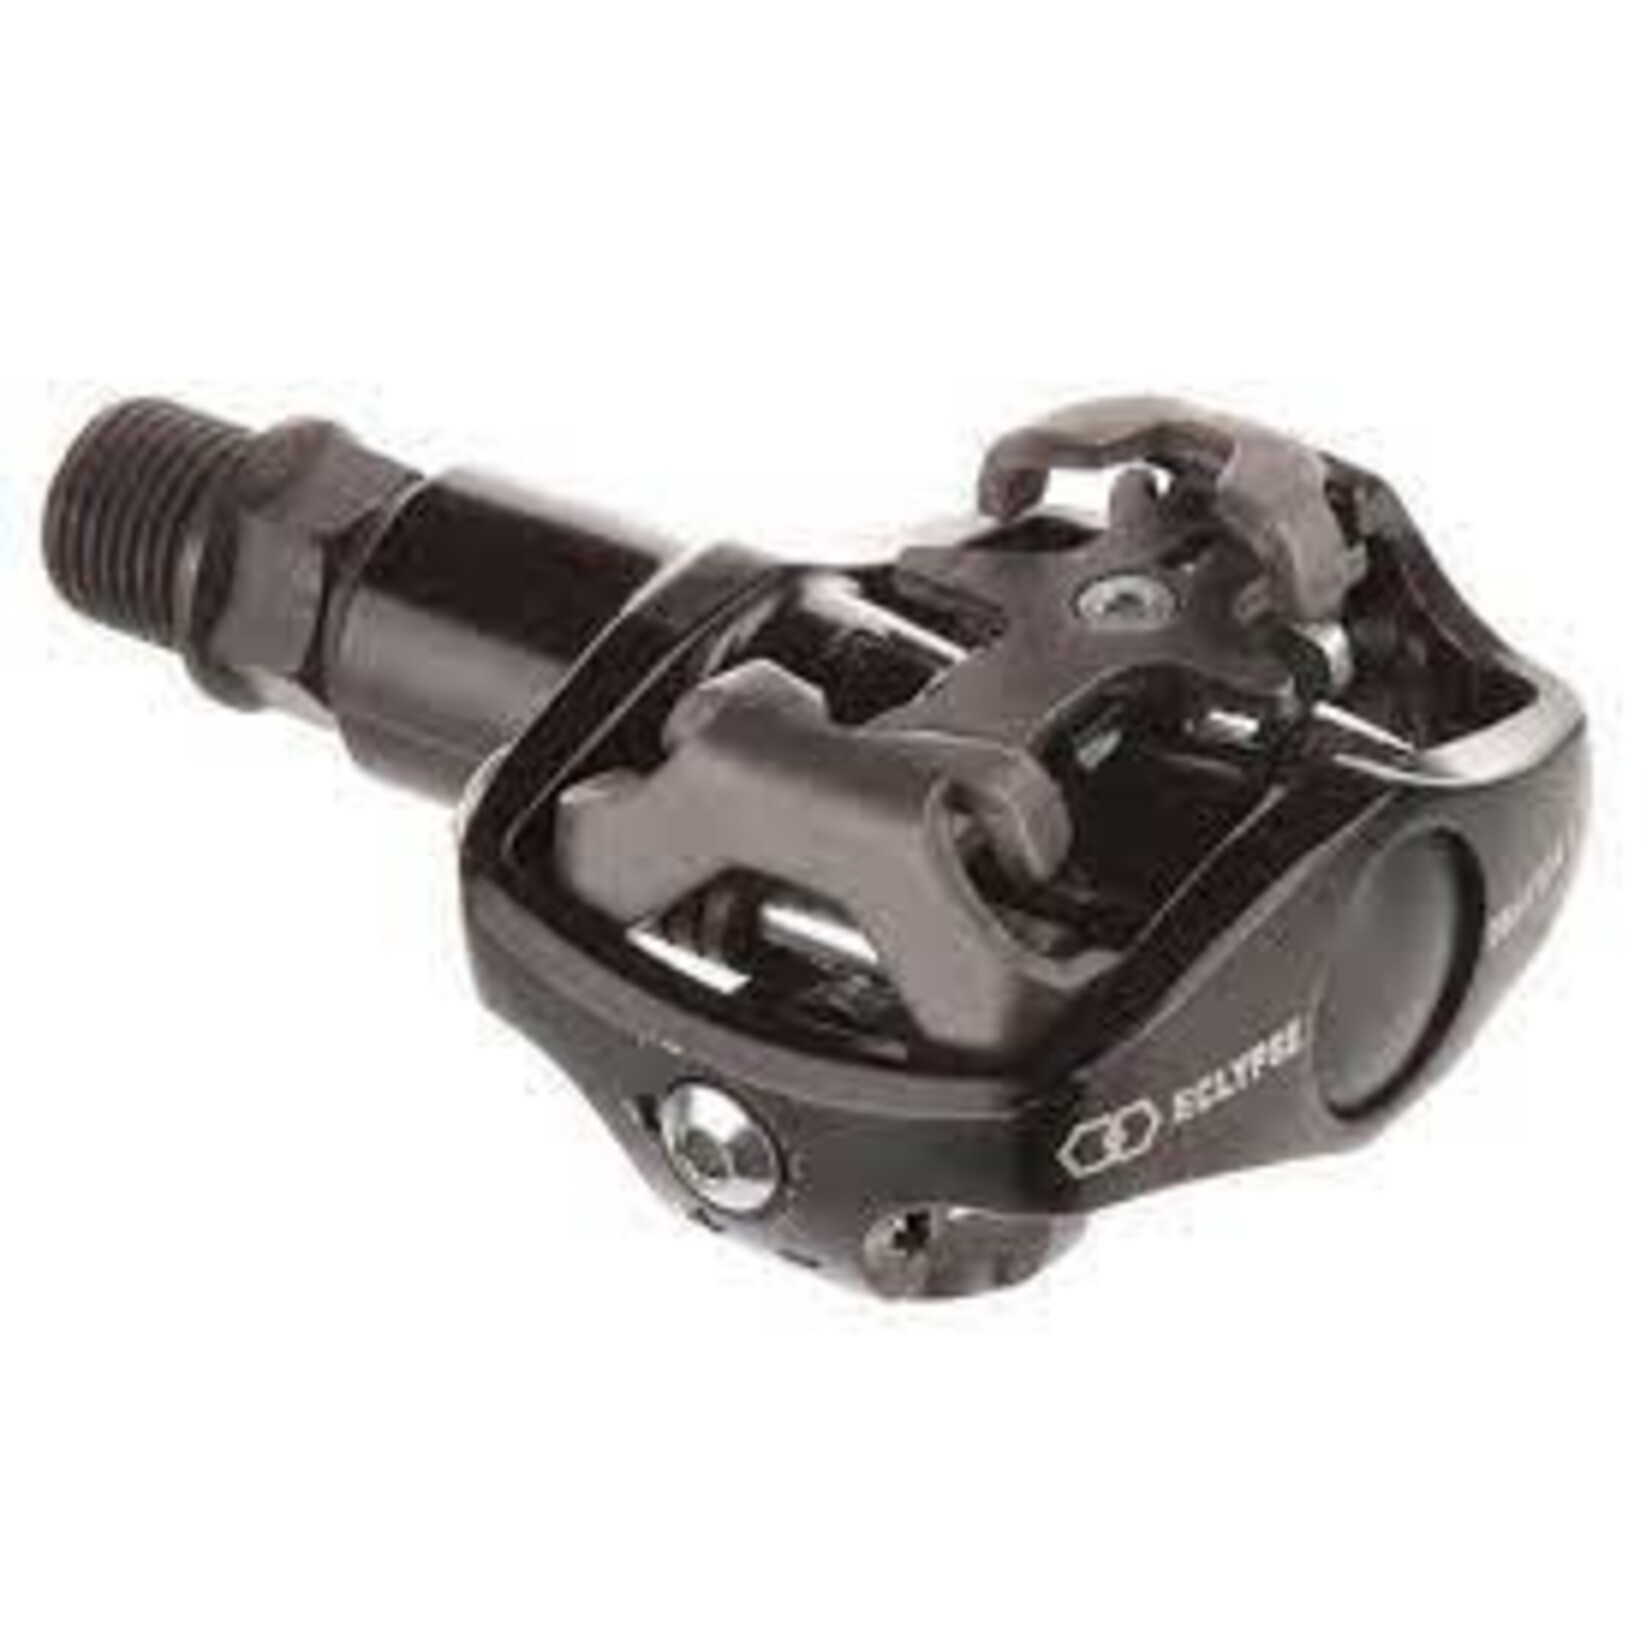 Eclypse, Engage, Pedals, Body: Alloy, Spindle: Cr-Mo, 9/16'', Black, Pair